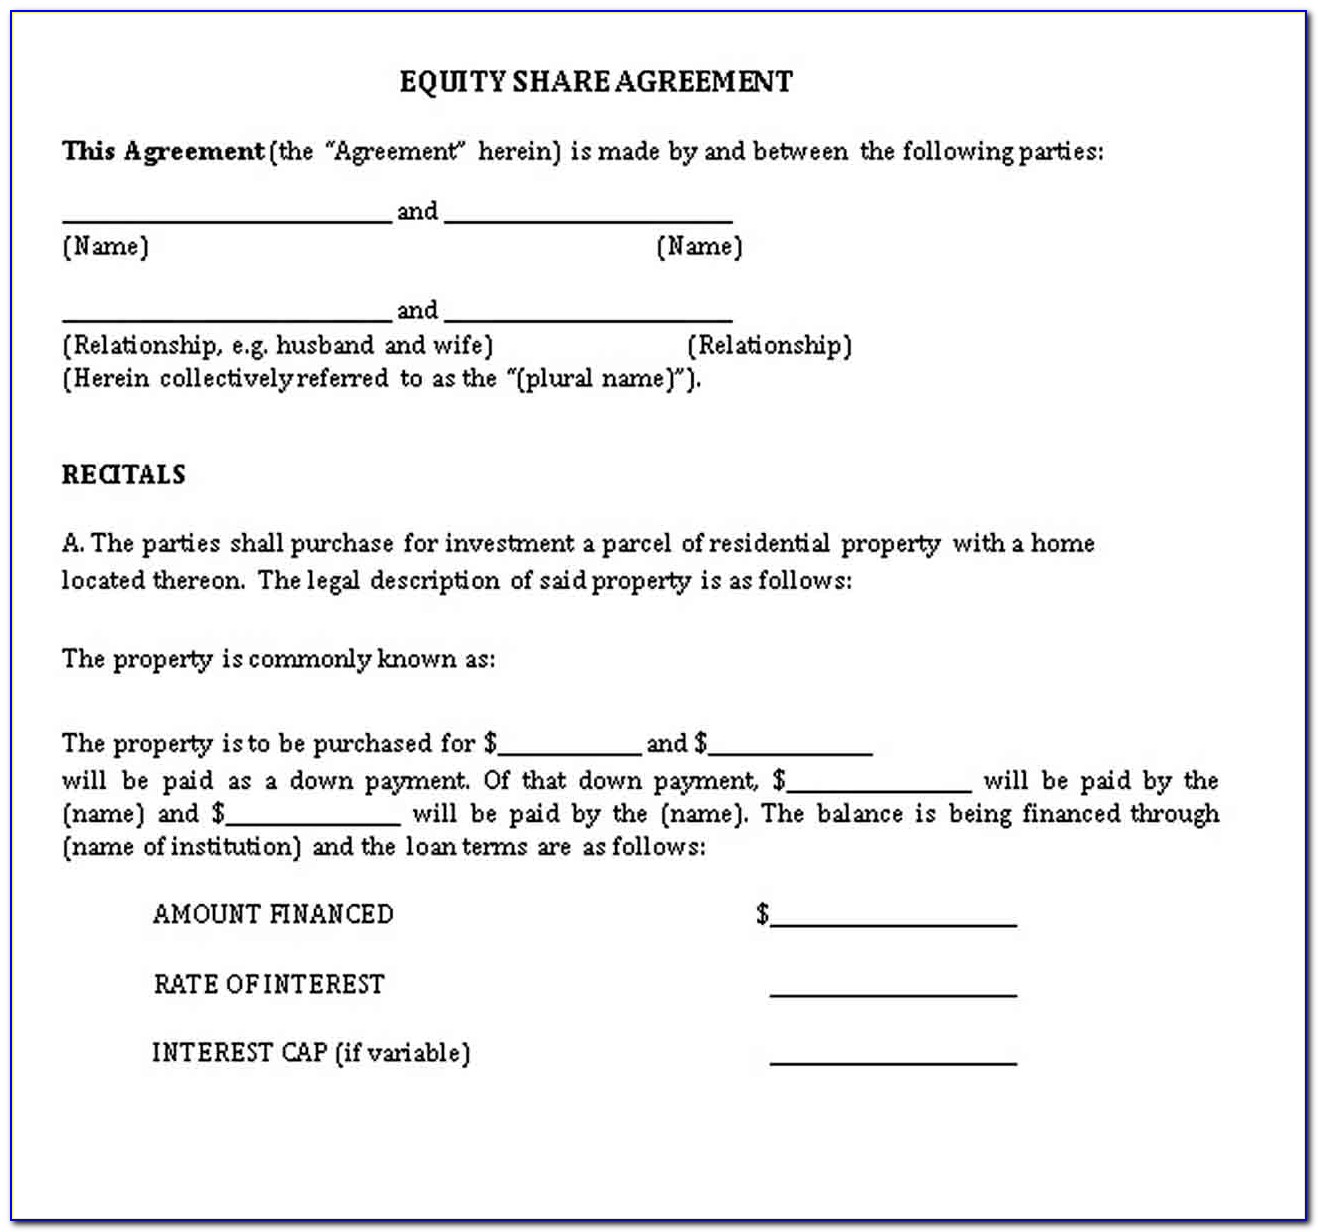 Business Equity Share Agreement Template